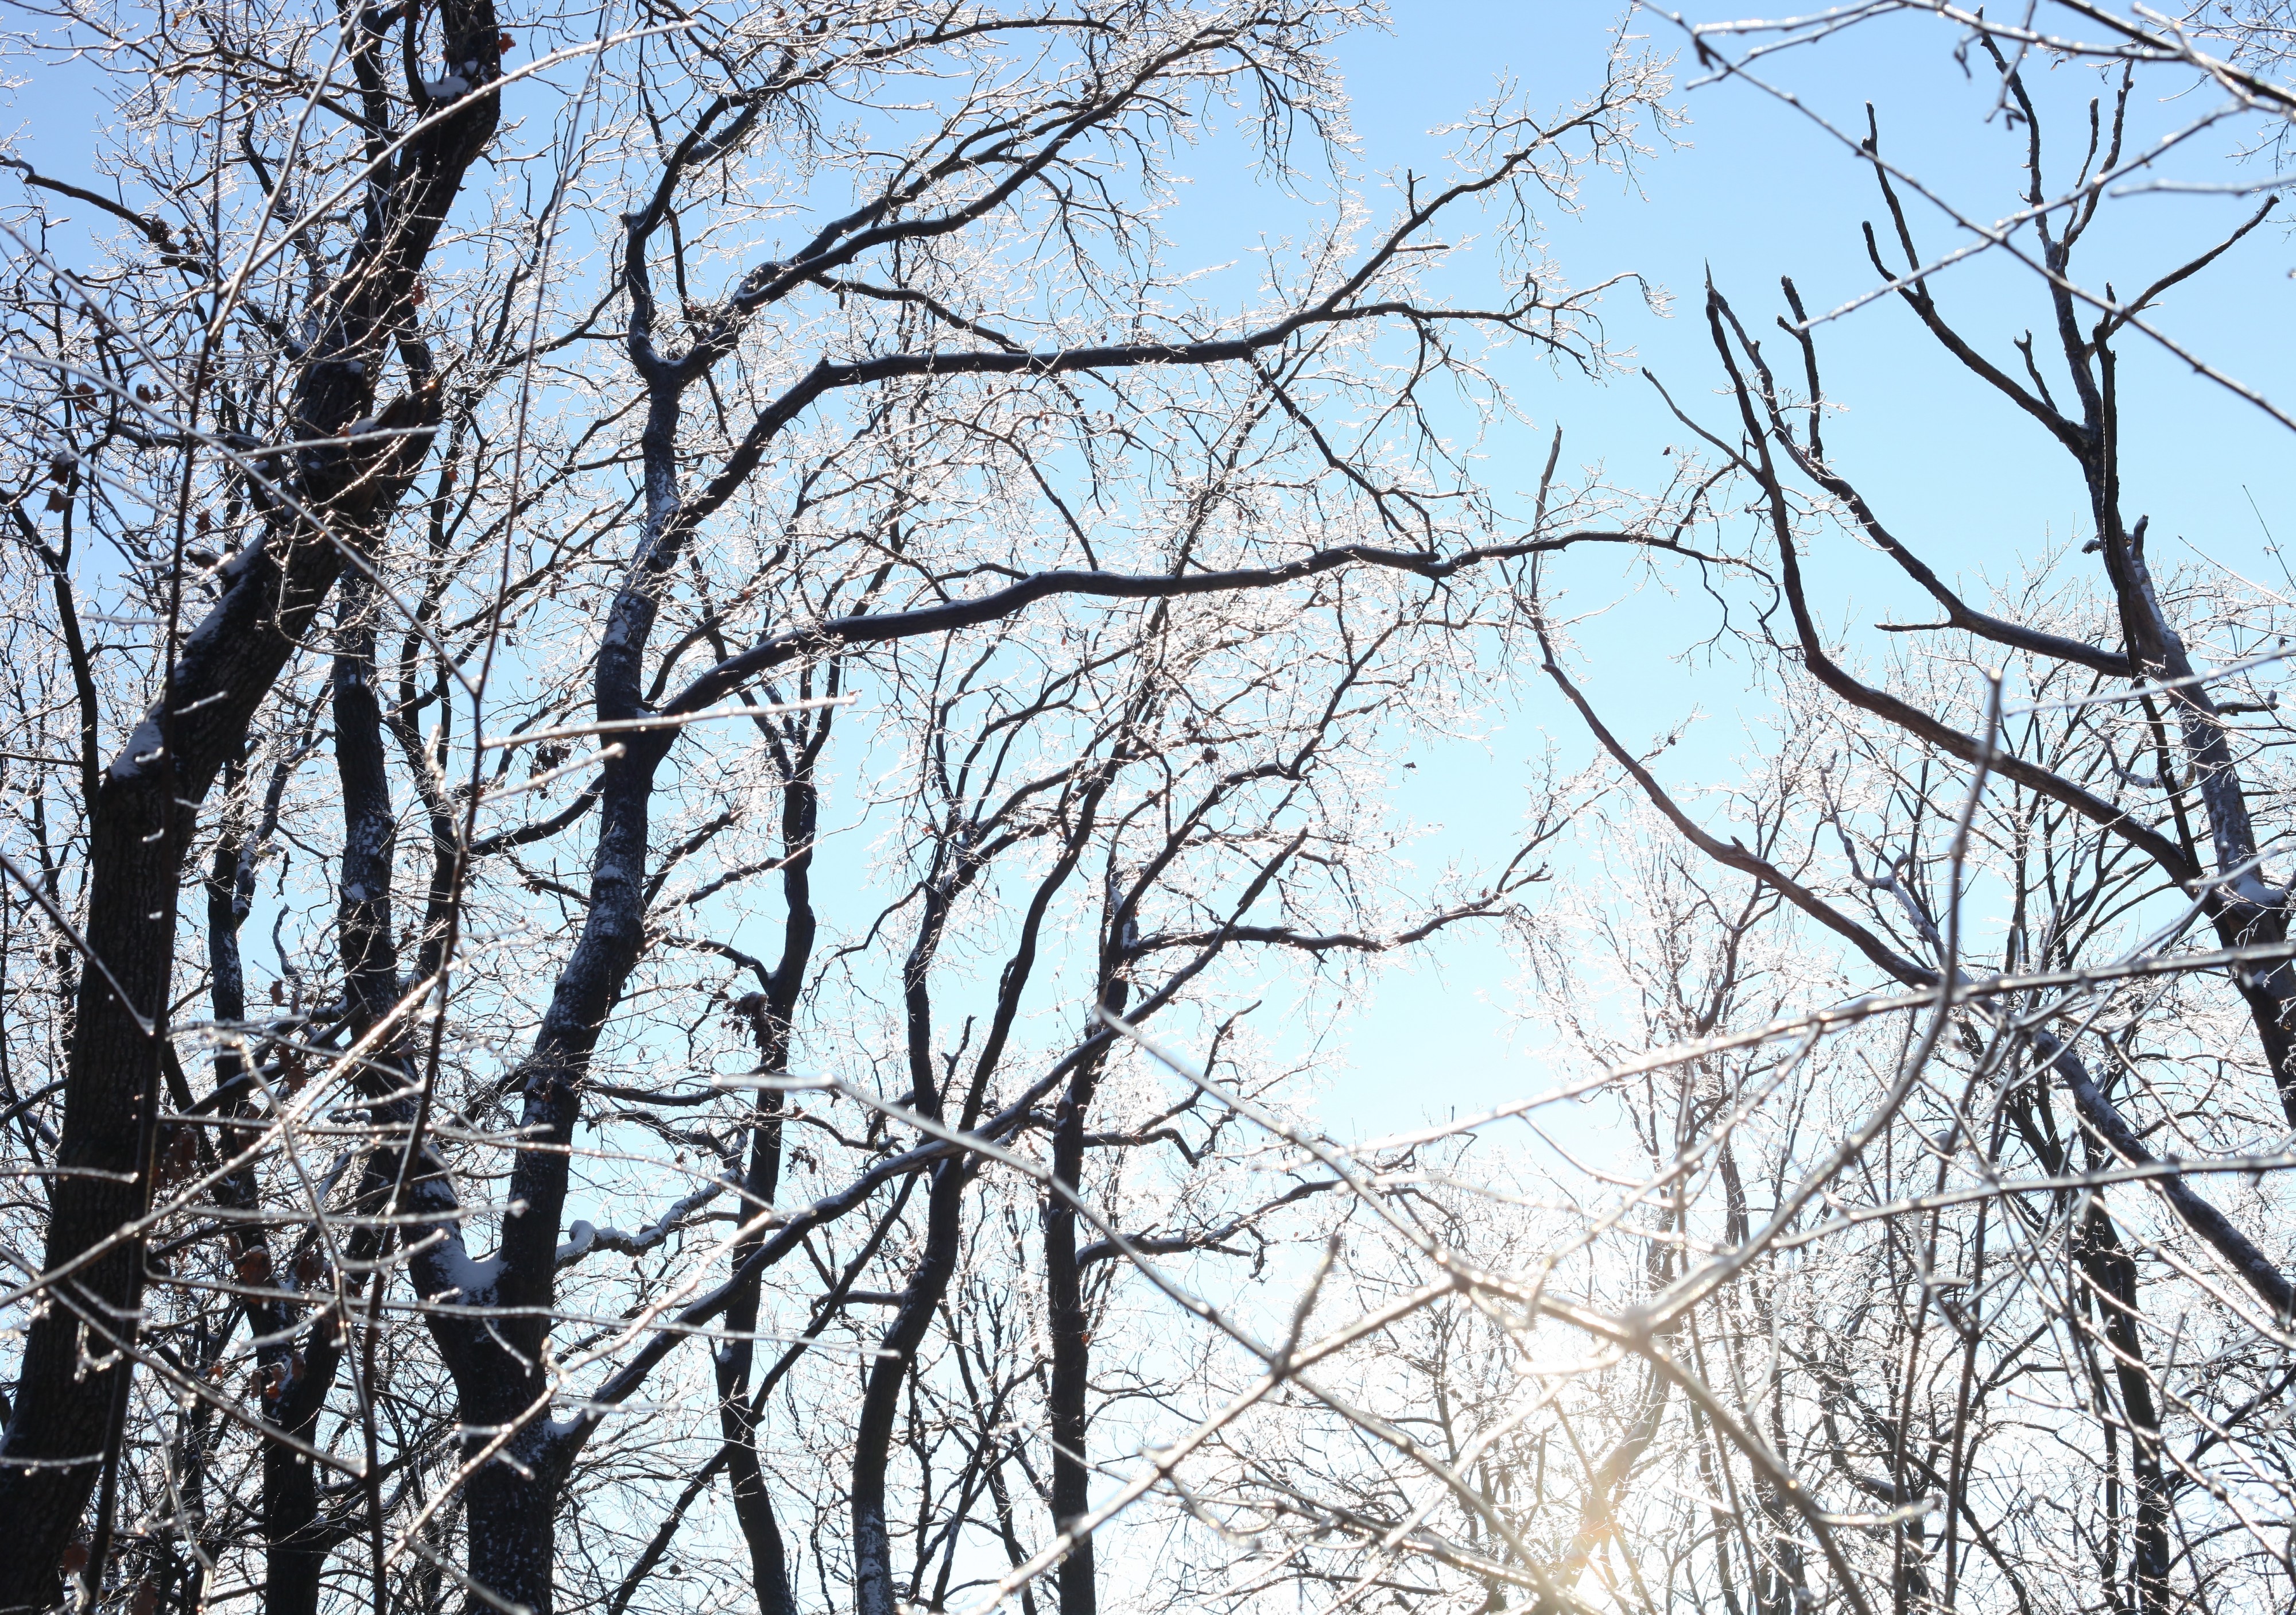 trees with their branches covered with ice, photo 4